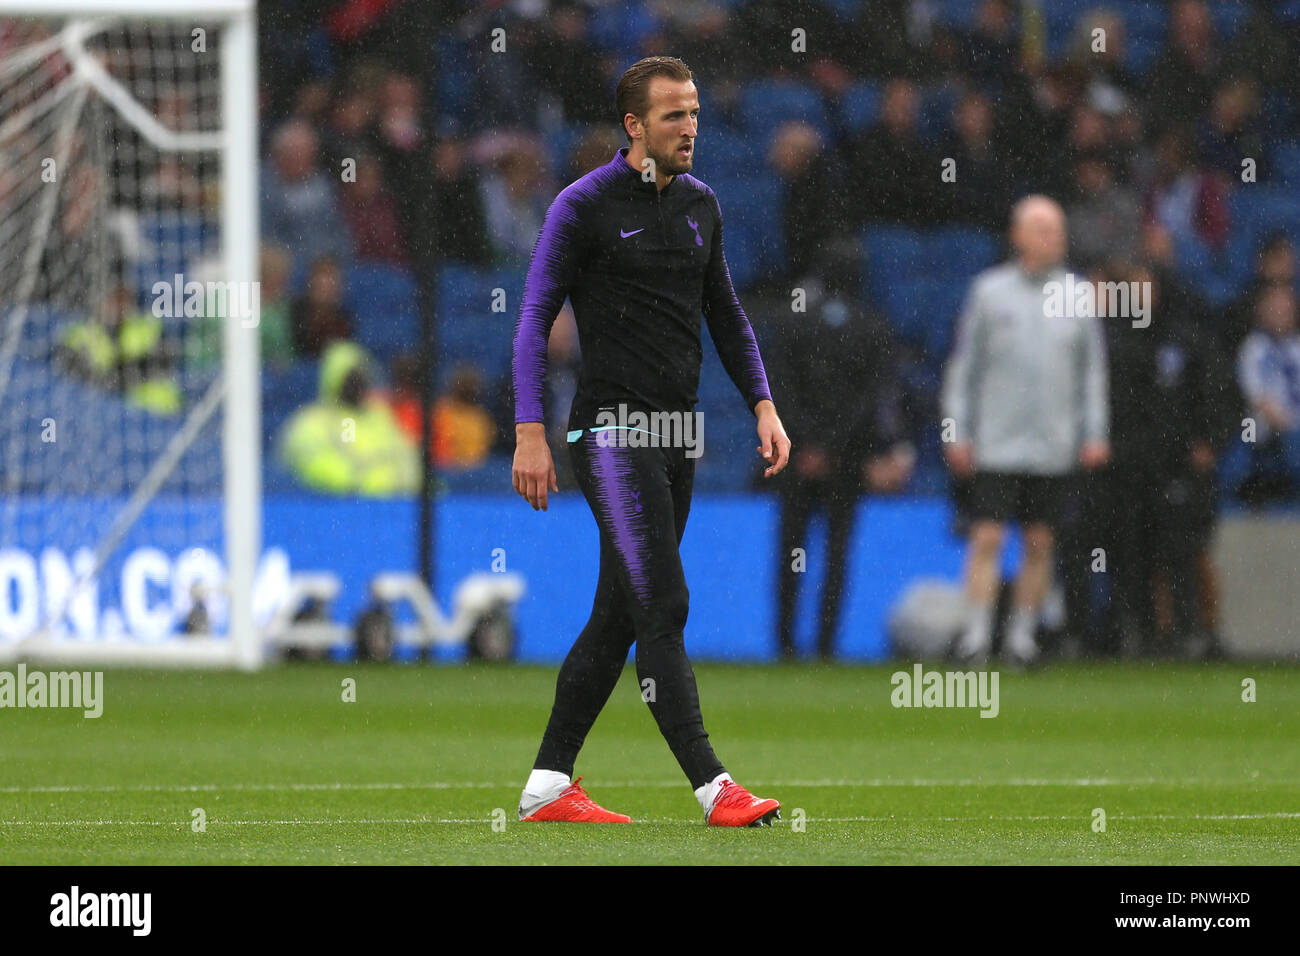 Tottenham Hotspur's Harry Kane during the Premier League match at the AMEX Stadium, Brighton. PRESS ASSOCIATION Photo. Picture date: Saturday September 22, 2018. See PA story SOCCER Brighton. Photo credit should read: Steven Paston/PA Wire. RESTRICTIONS: No use with unauthorised audio, video, data, fixture lists, club/league logos or "live" services. Online in-match use limited to 120 images, no video emulation. No use in betting, games or single club/league/player publications. Stock Photo